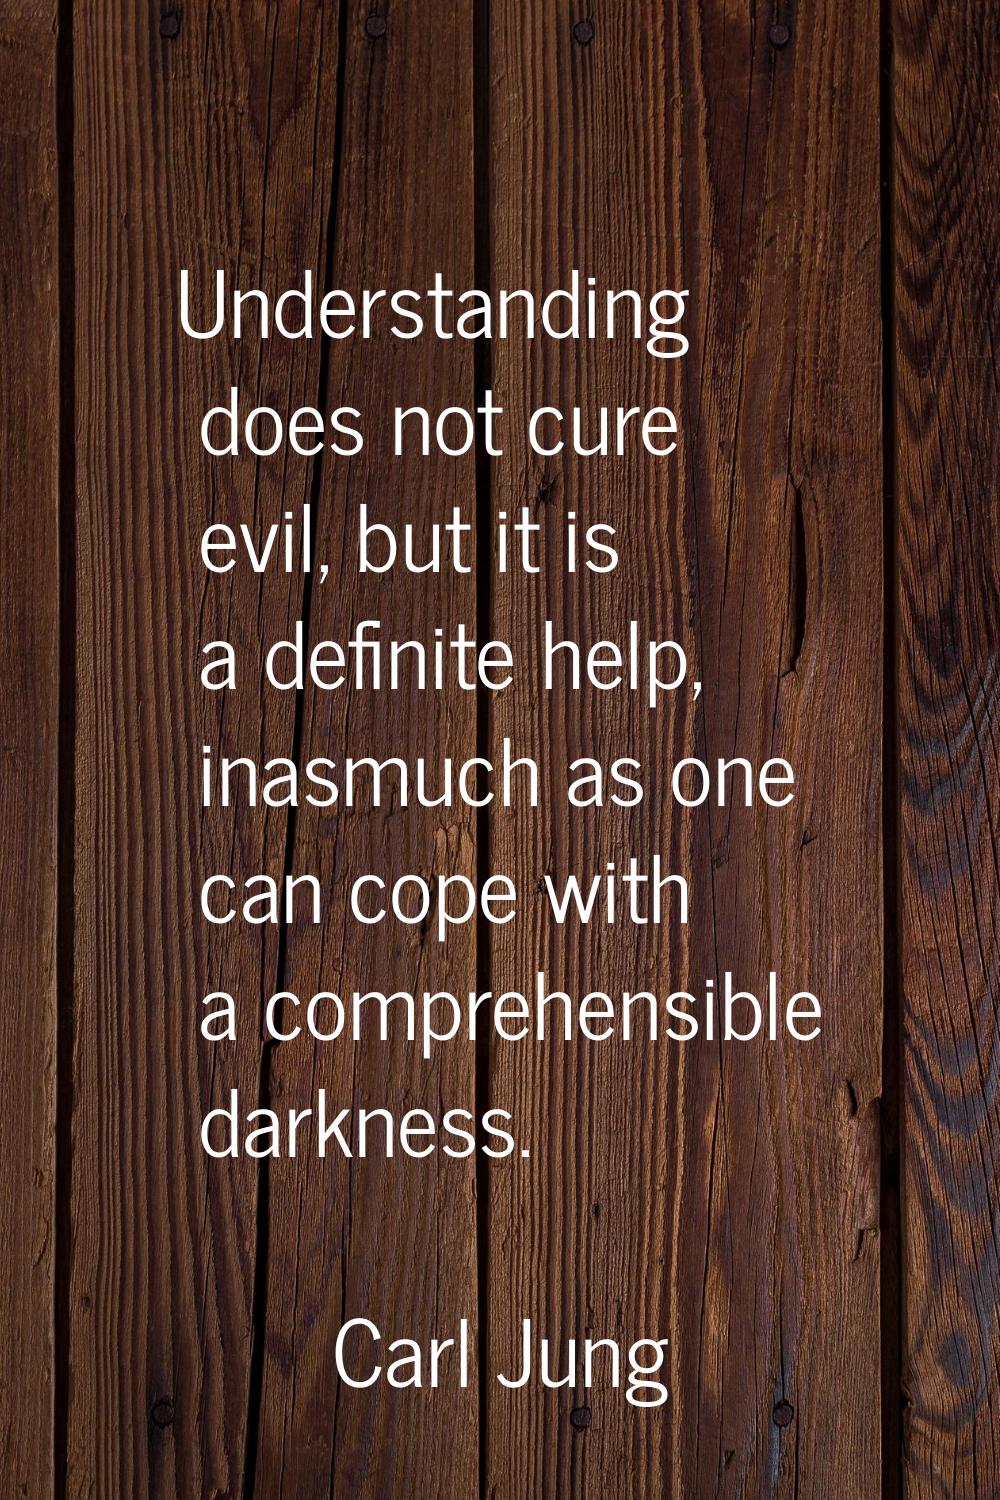 Understanding does not cure evil, but it is a definite help, inasmuch as one can cope with a compre